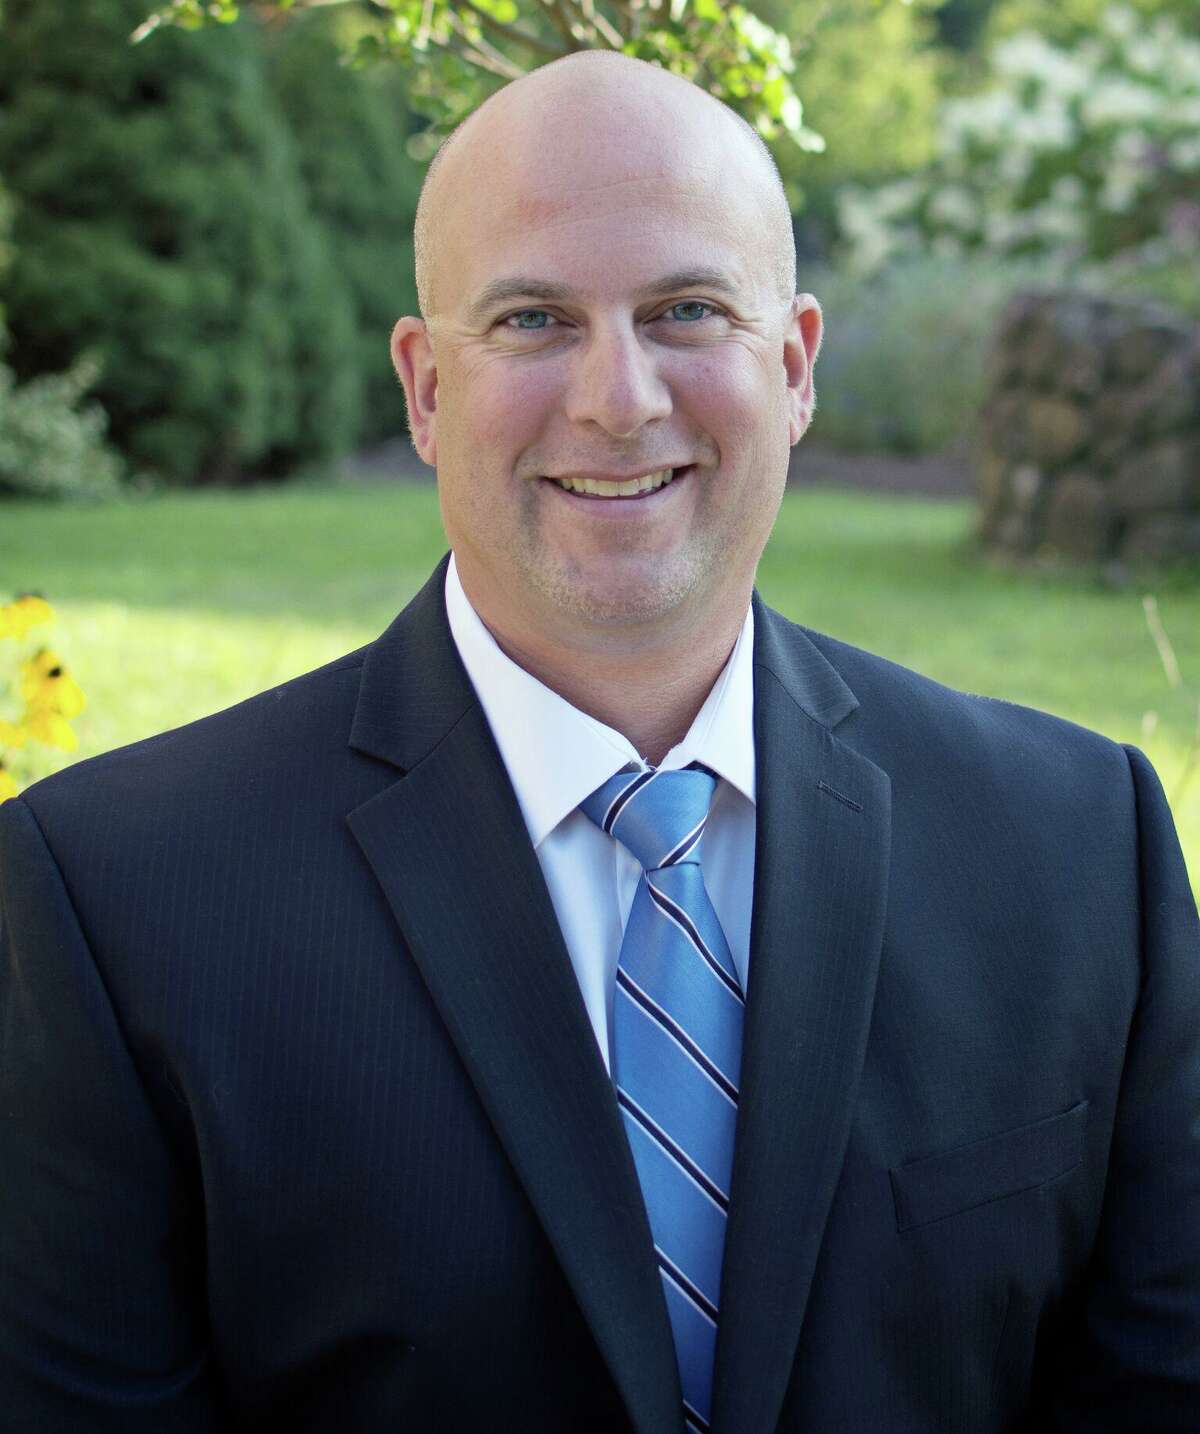 Robert Phillips is the new executive director of the Northwest Hills Council of Governments.